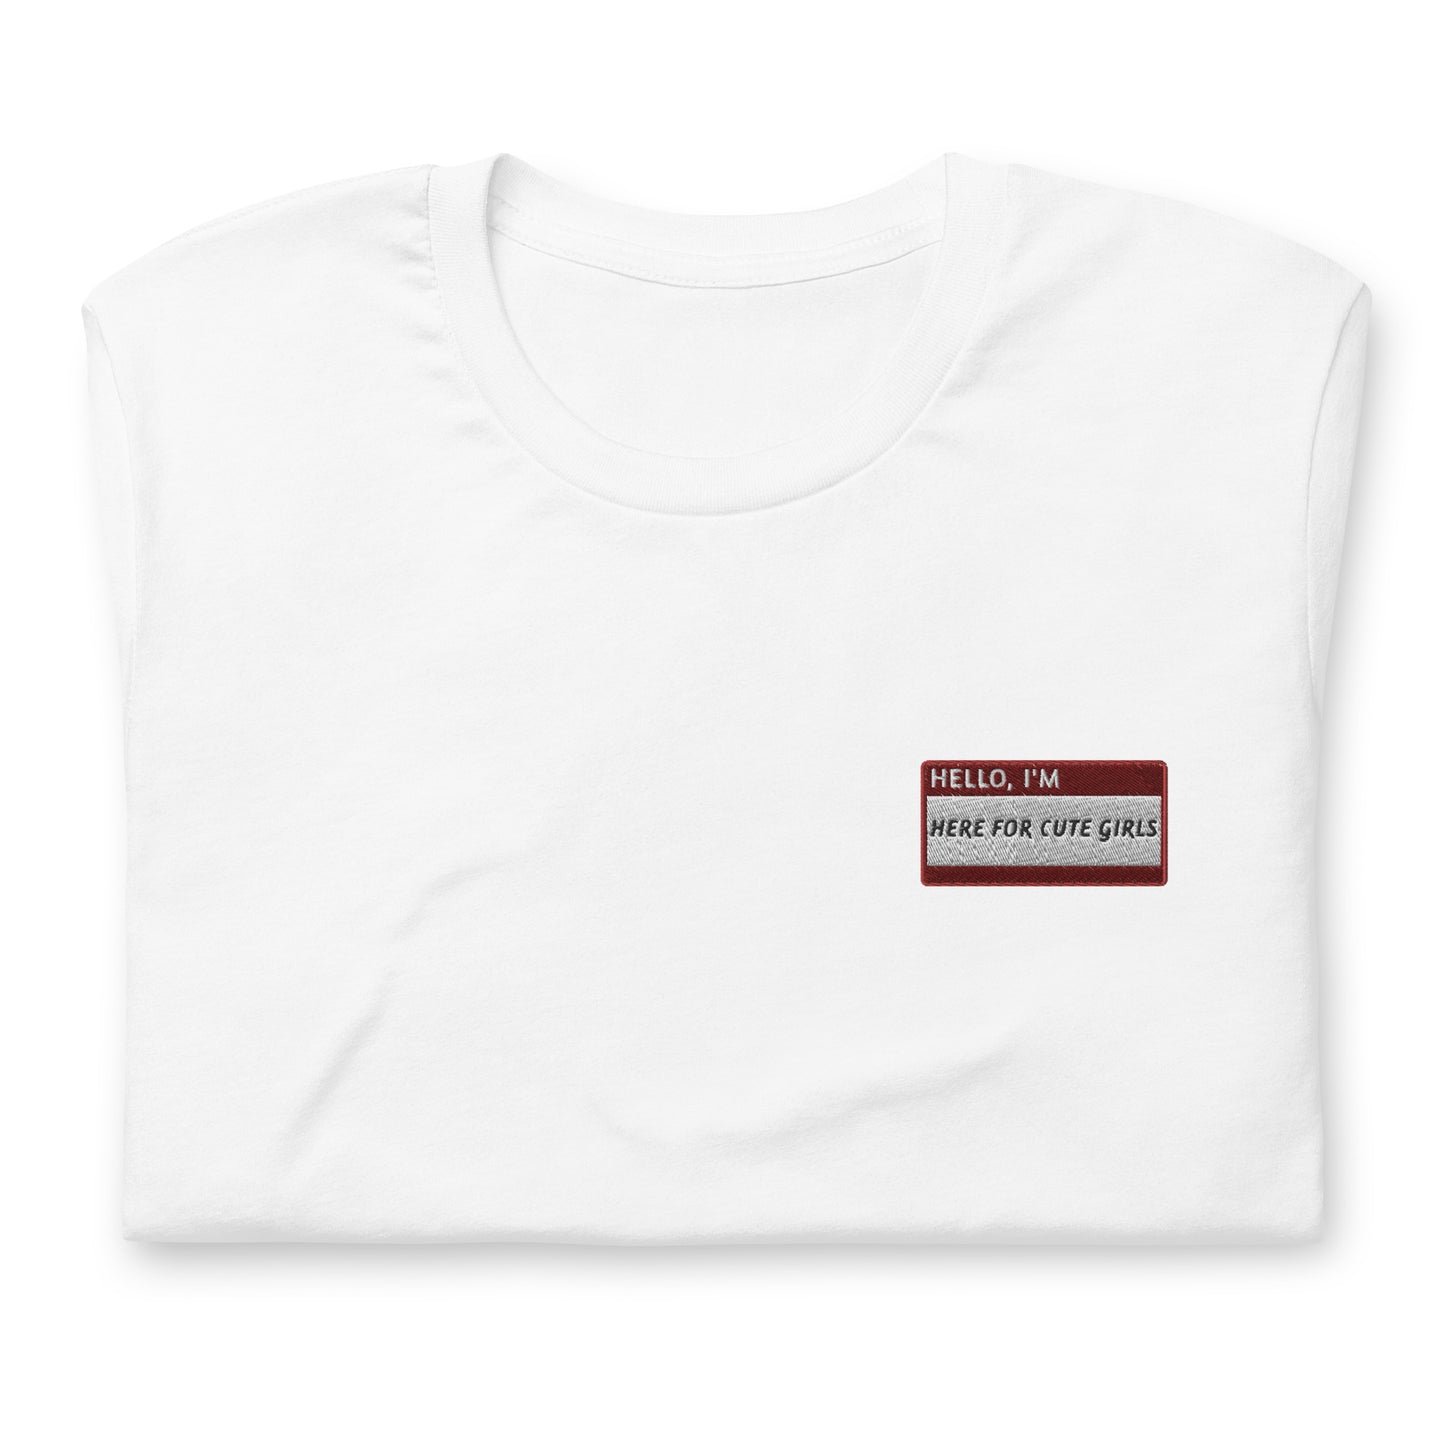 HELLO I'M HERE FOR CUTE GIRLS - Name Tag T-Shirt